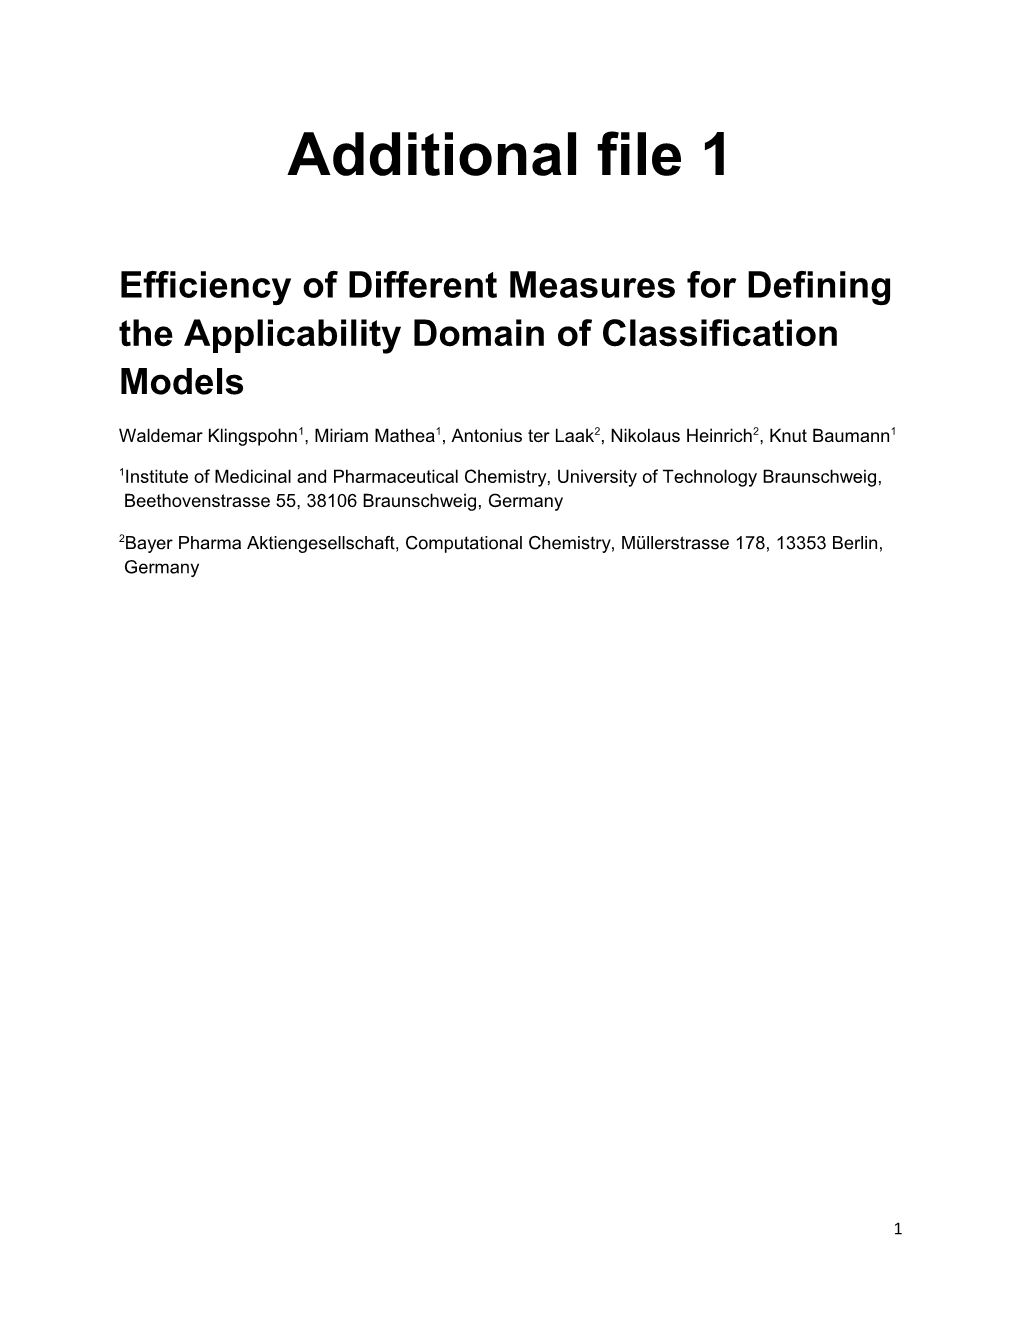 Efficiency of Different Measures for Defining Theapplicability Domain of Classification Models